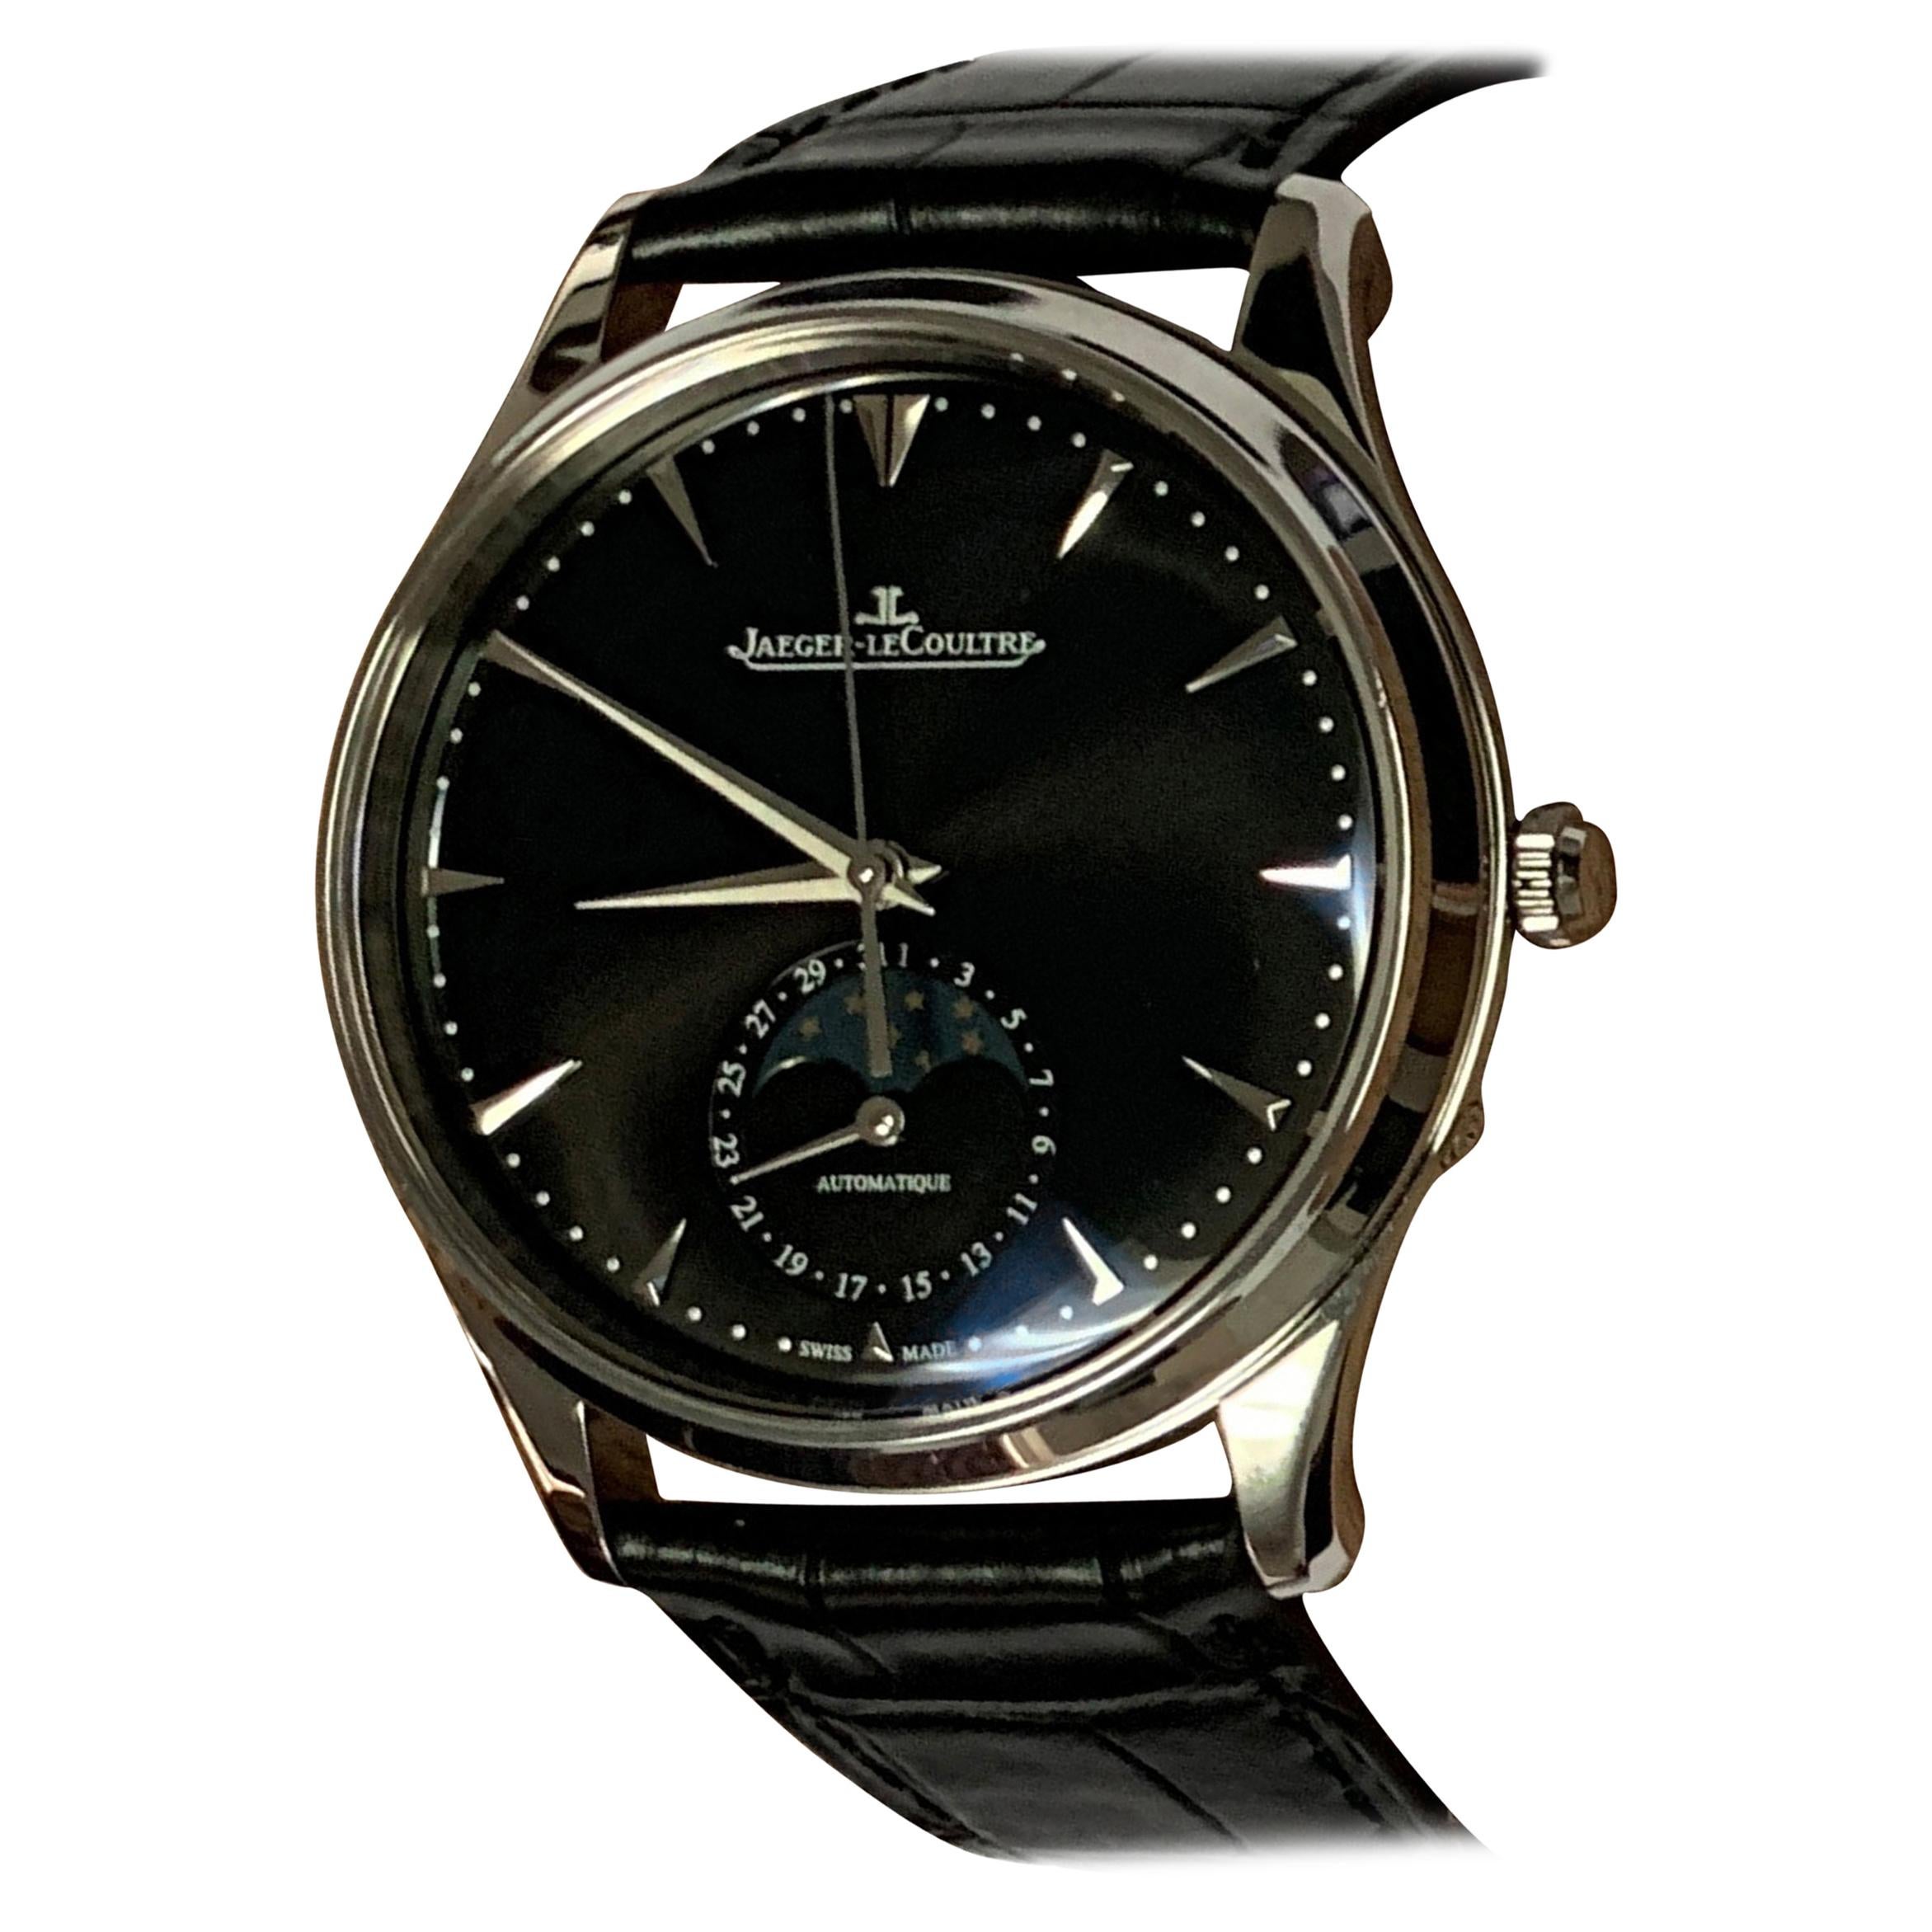 Jaeger-LeCoultre Master Ultra Thin Moon 

Calibre : 925/1

Case : Stainless Steel, Water-resistance : 5 bar, Diameter : 39mm, Thickness : 9.9mm

Functions : Date, Hour - Minute, Moon phases, Seconds

Movement : Automatic, self-winding, Components :